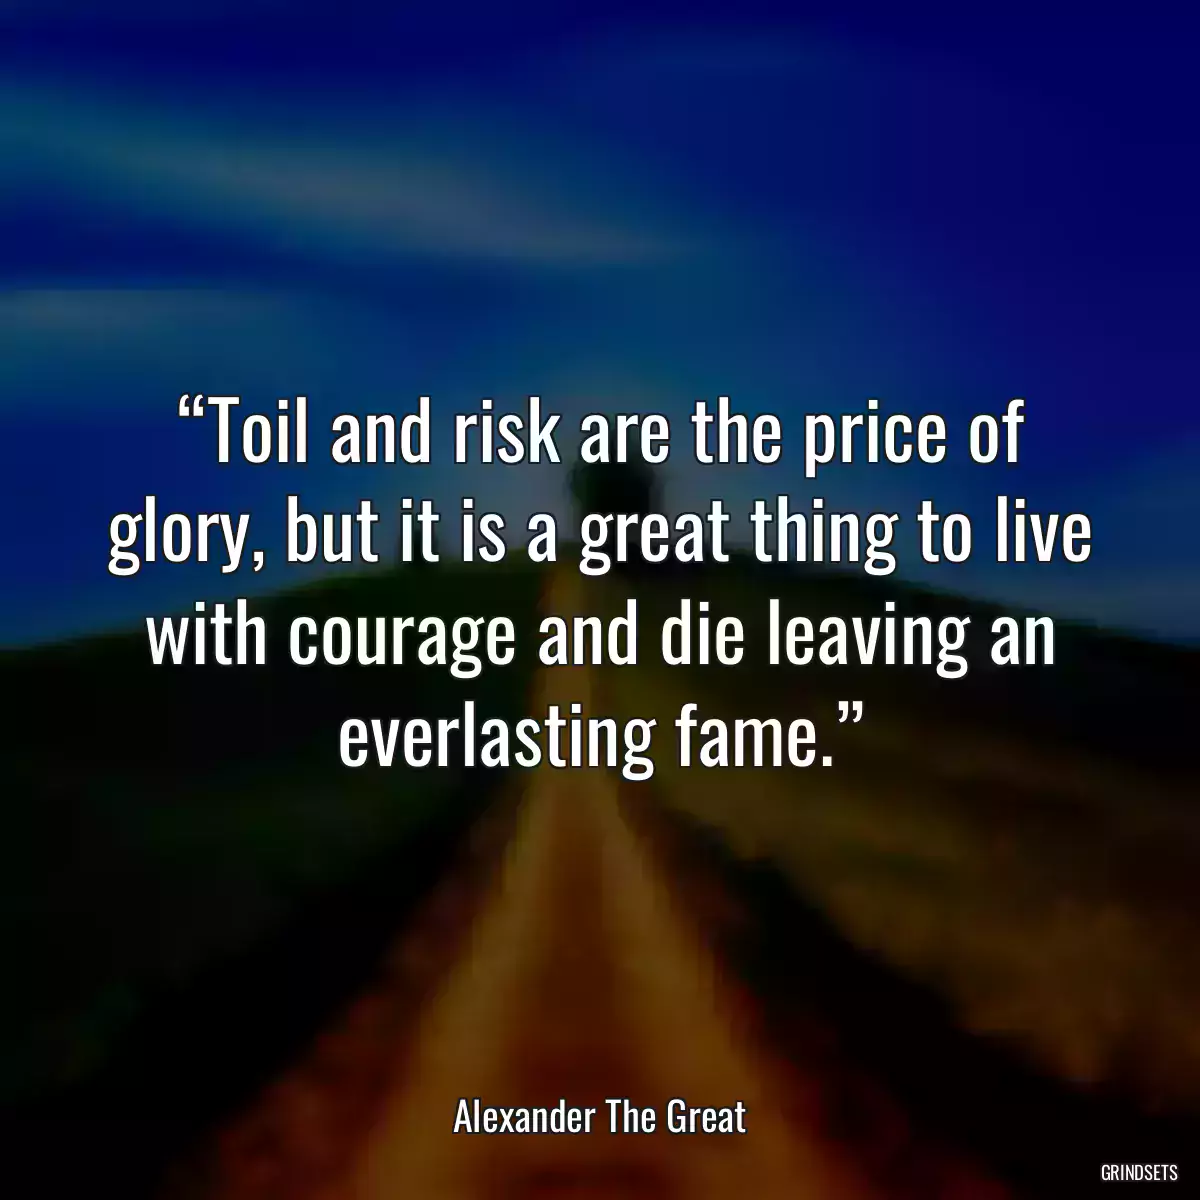 “Toil and risk are the price of glory, but it is a great thing to live with courage and die leaving an everlasting fame.”